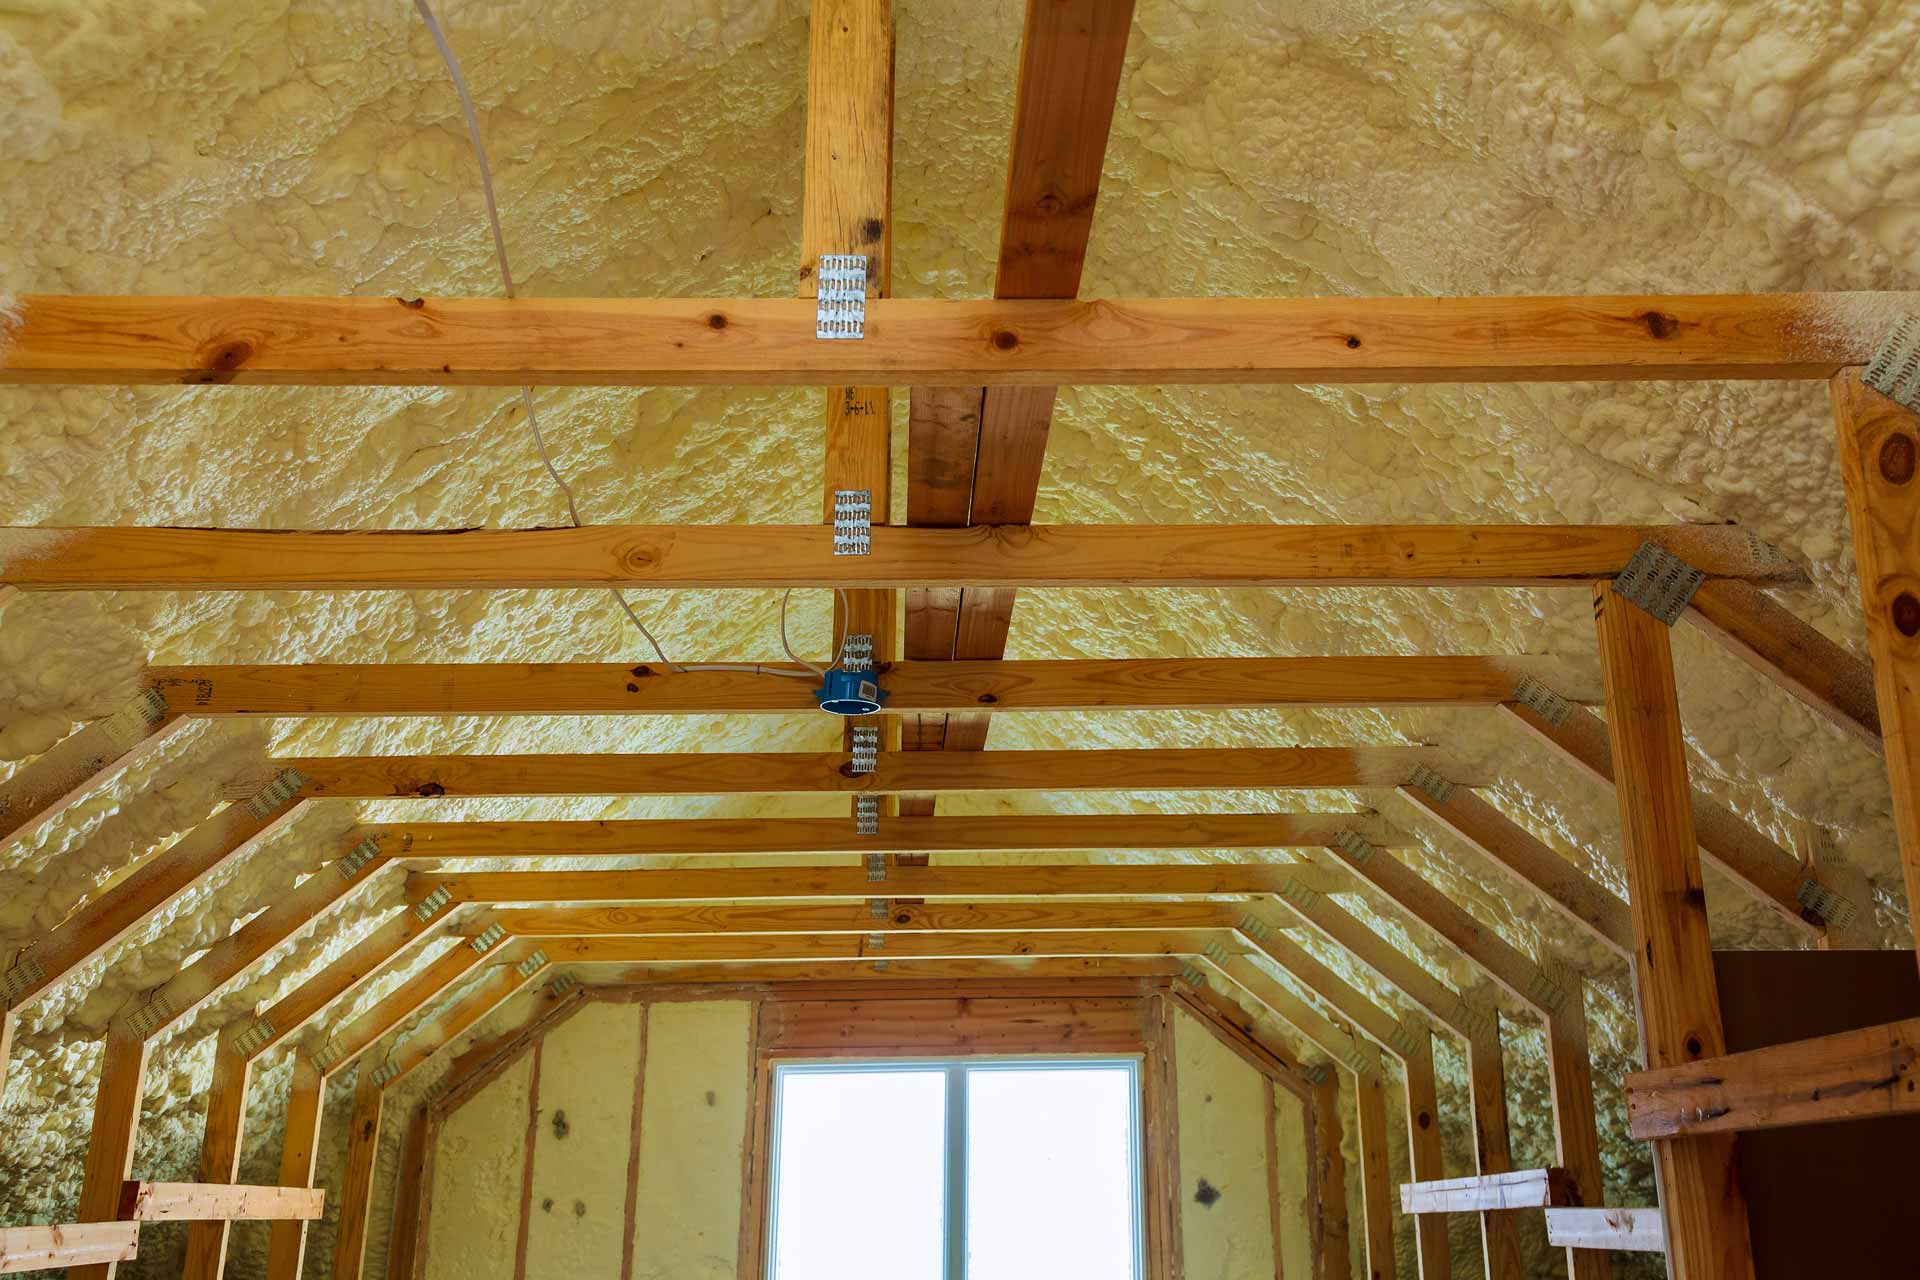 Interior of new construction with spray foam insulation